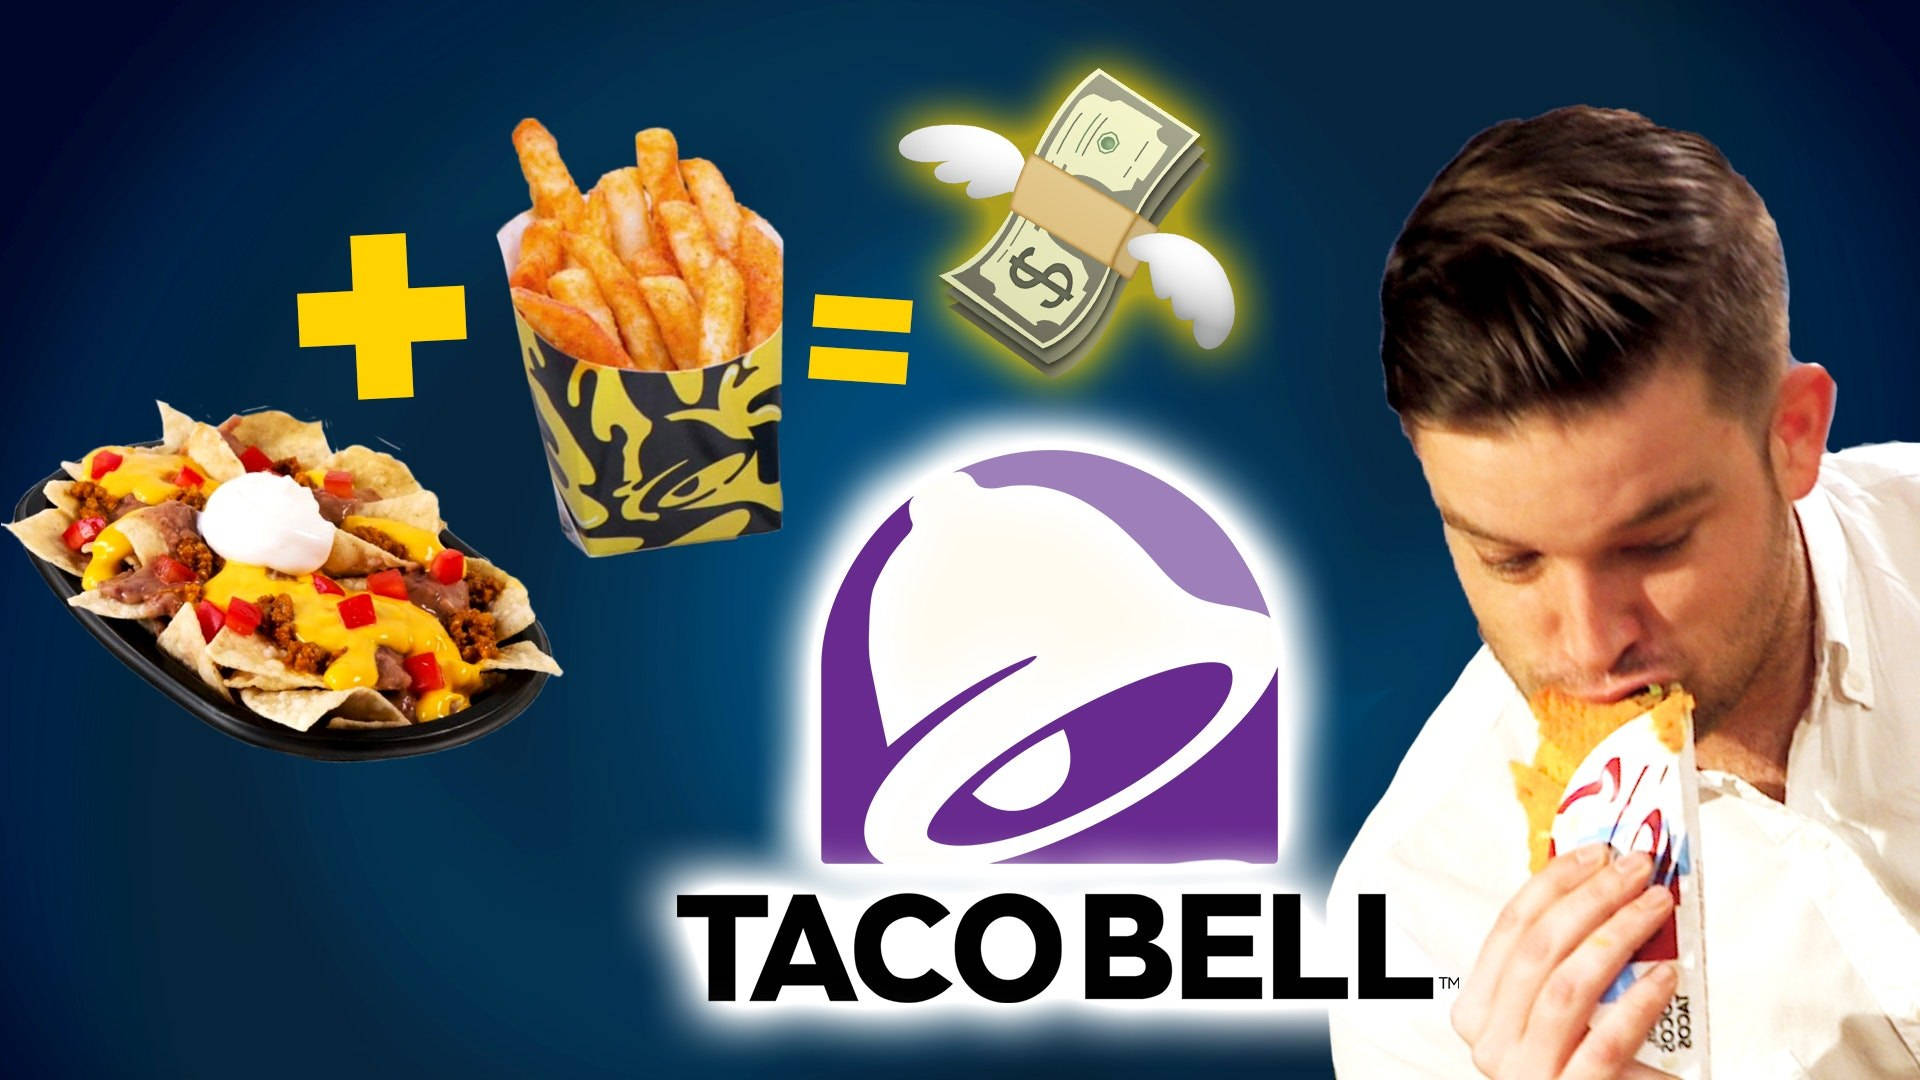 Taco Bell Funny Poster